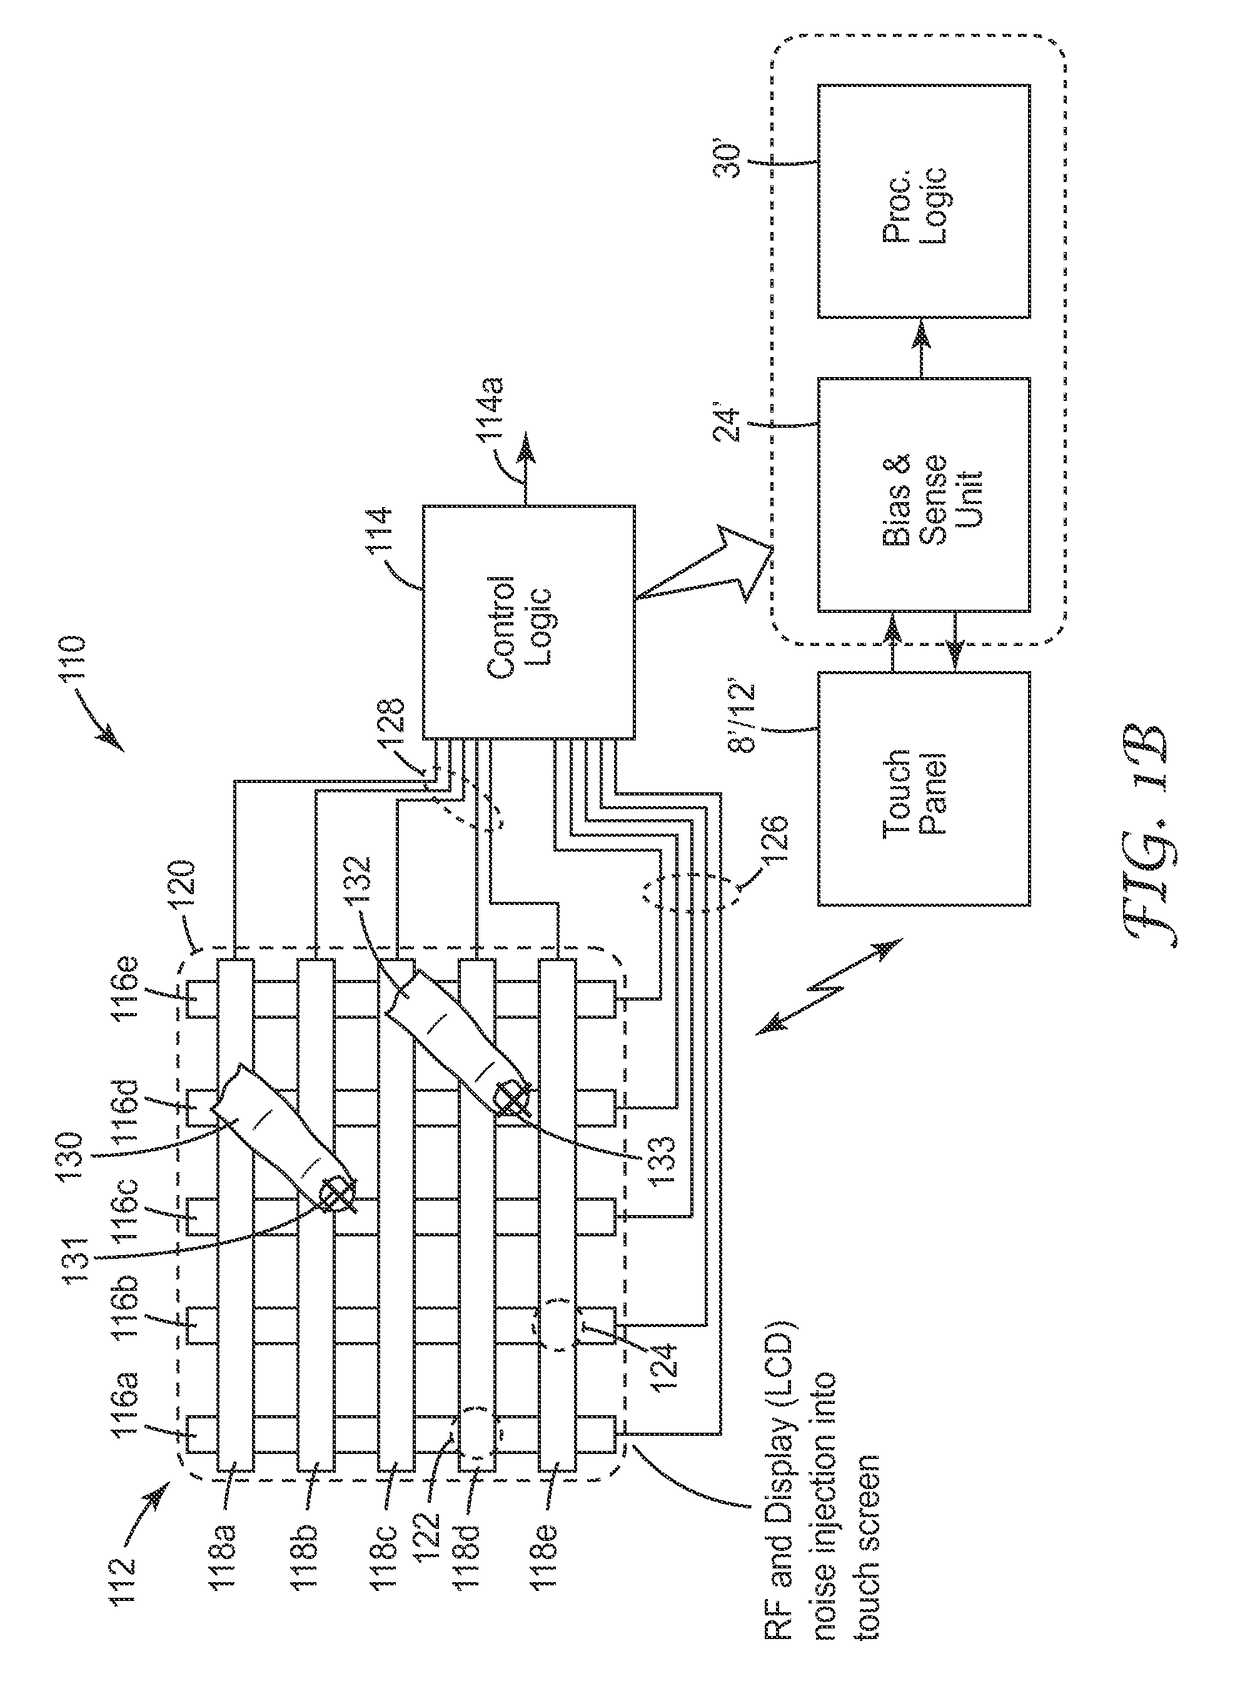 Capacitive-based touch apparatus and method with reduced interference